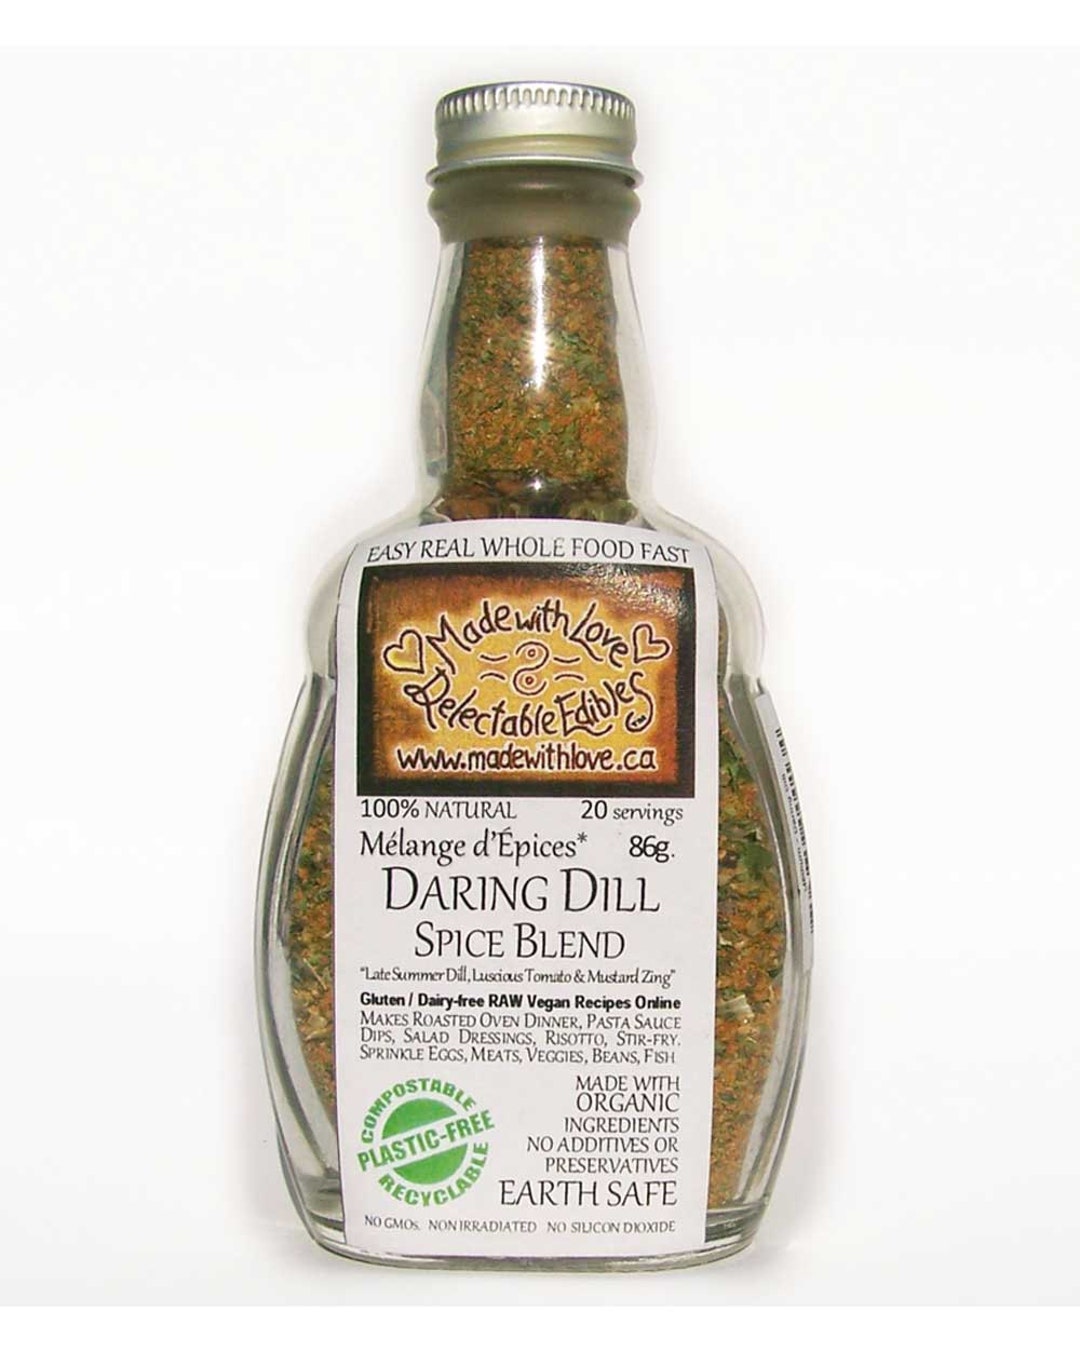 Organic Sprinkle 24 Herbs & Spices Seasoning, 1 each at Whole Foods Market